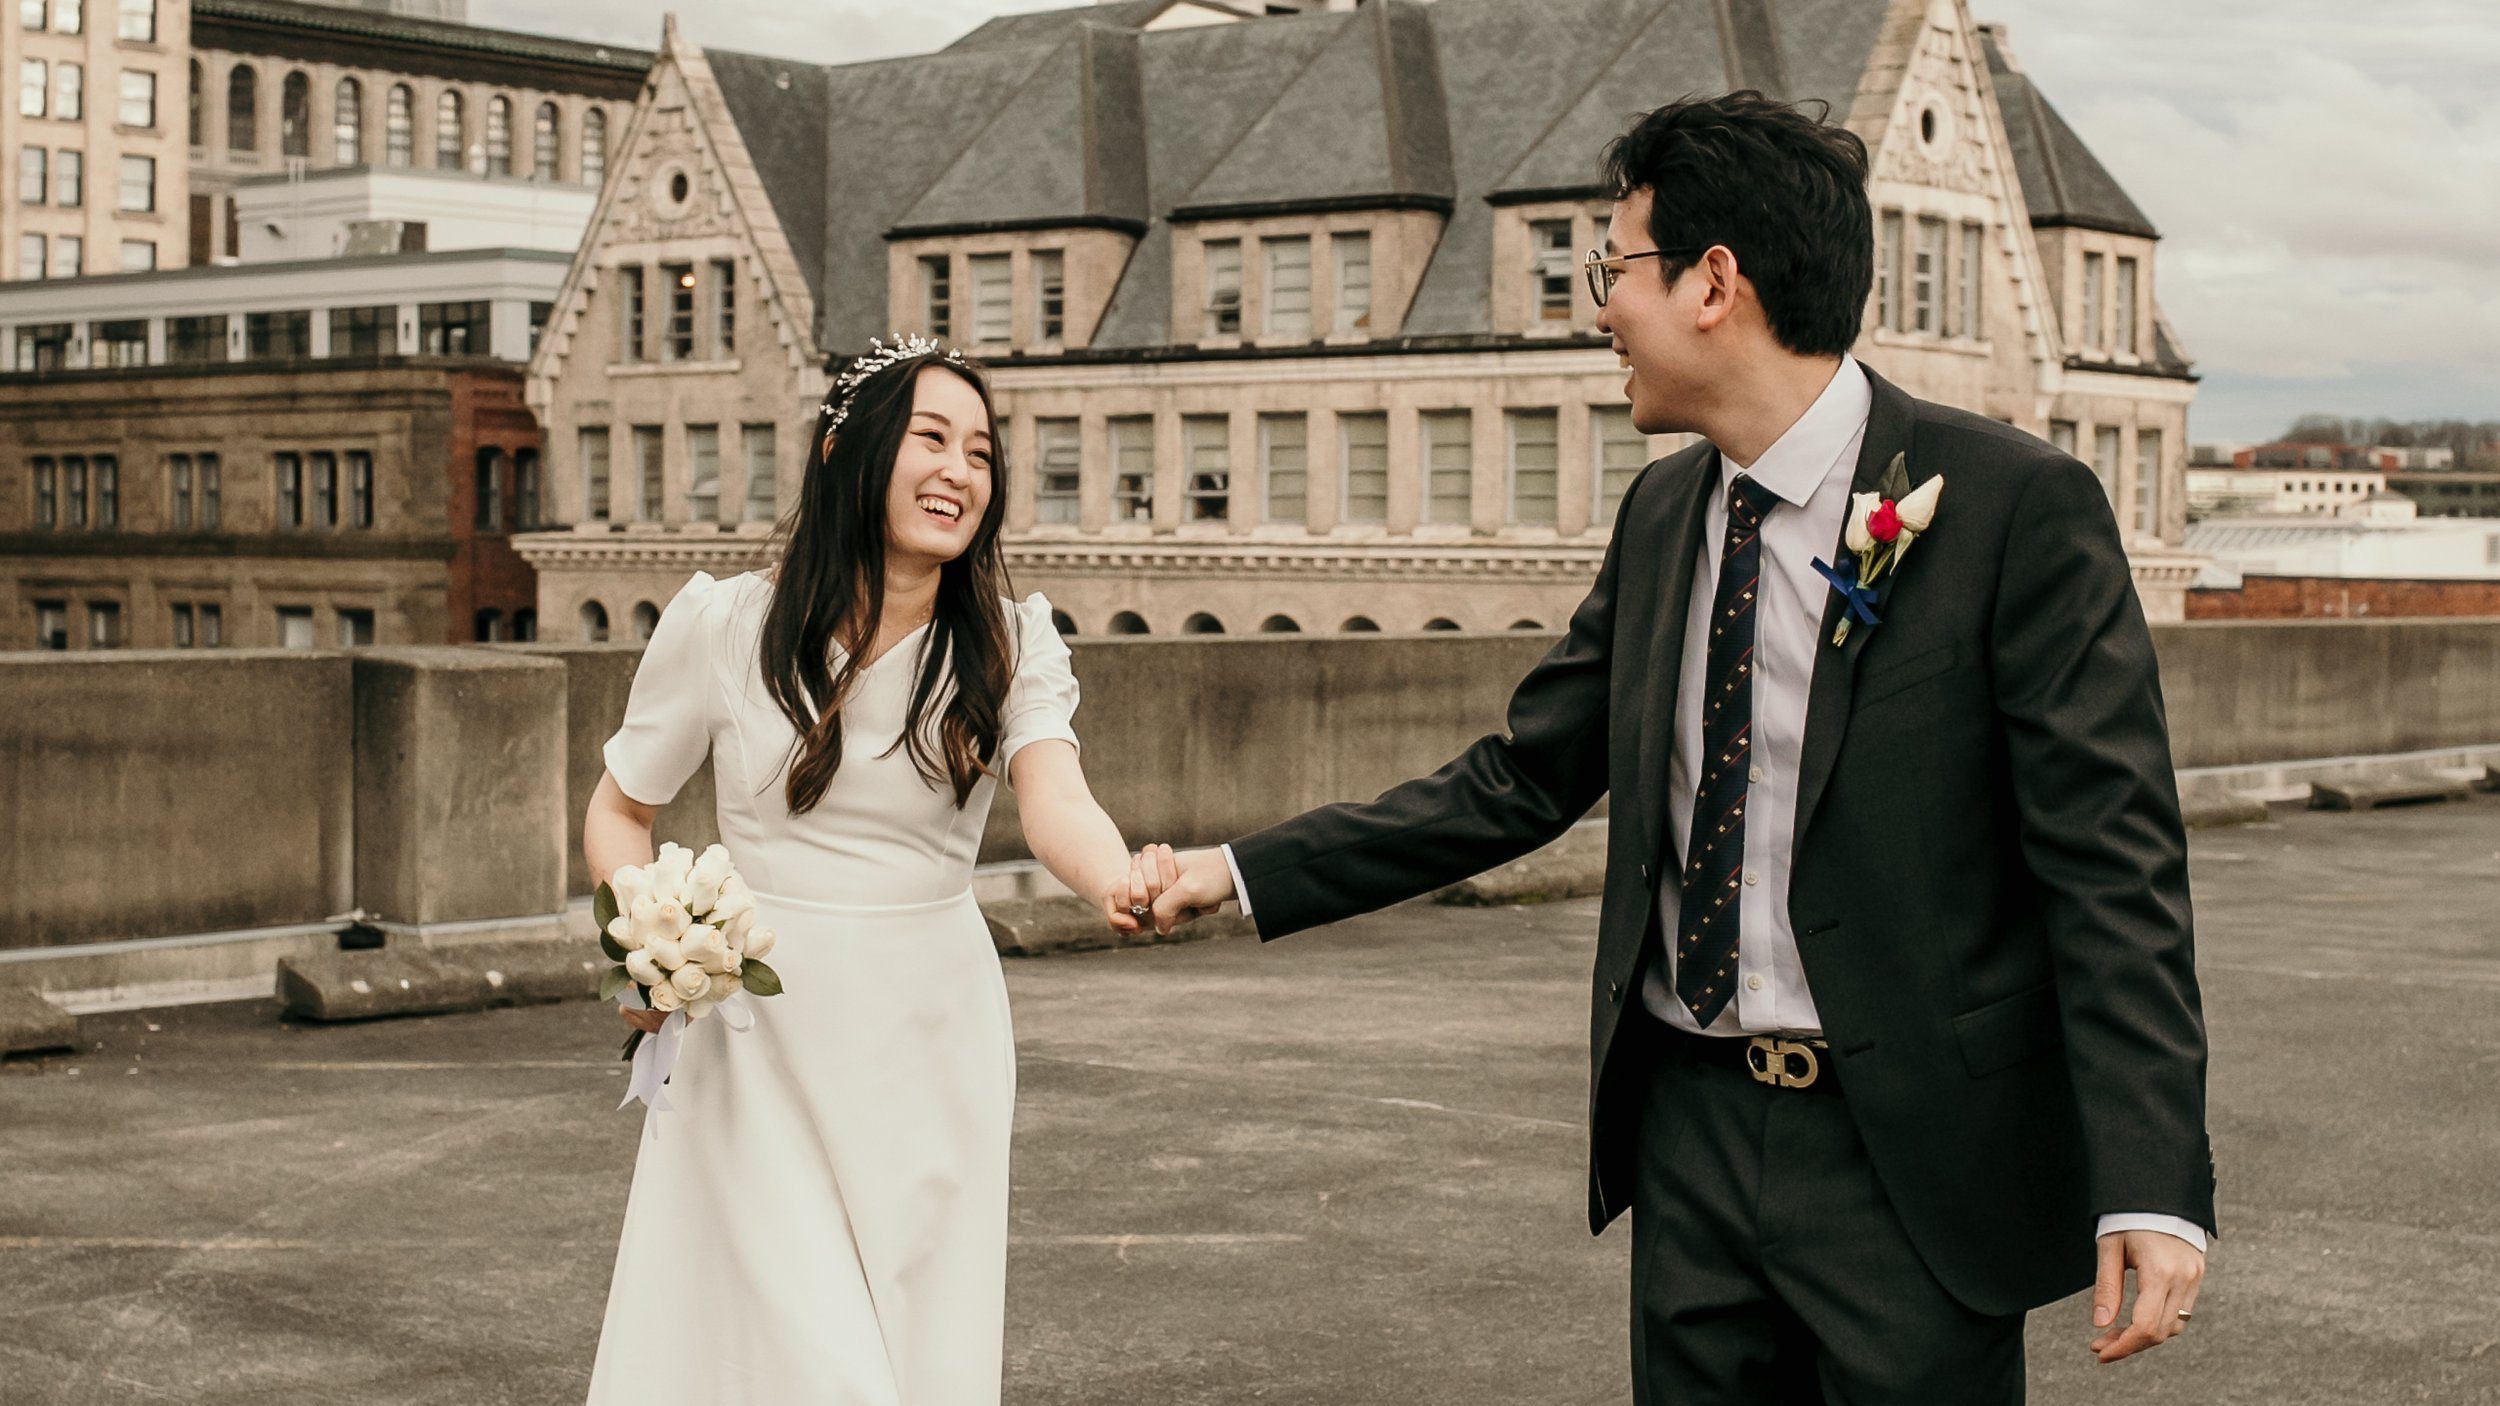 Seattle Courthouse Elopement Ideas